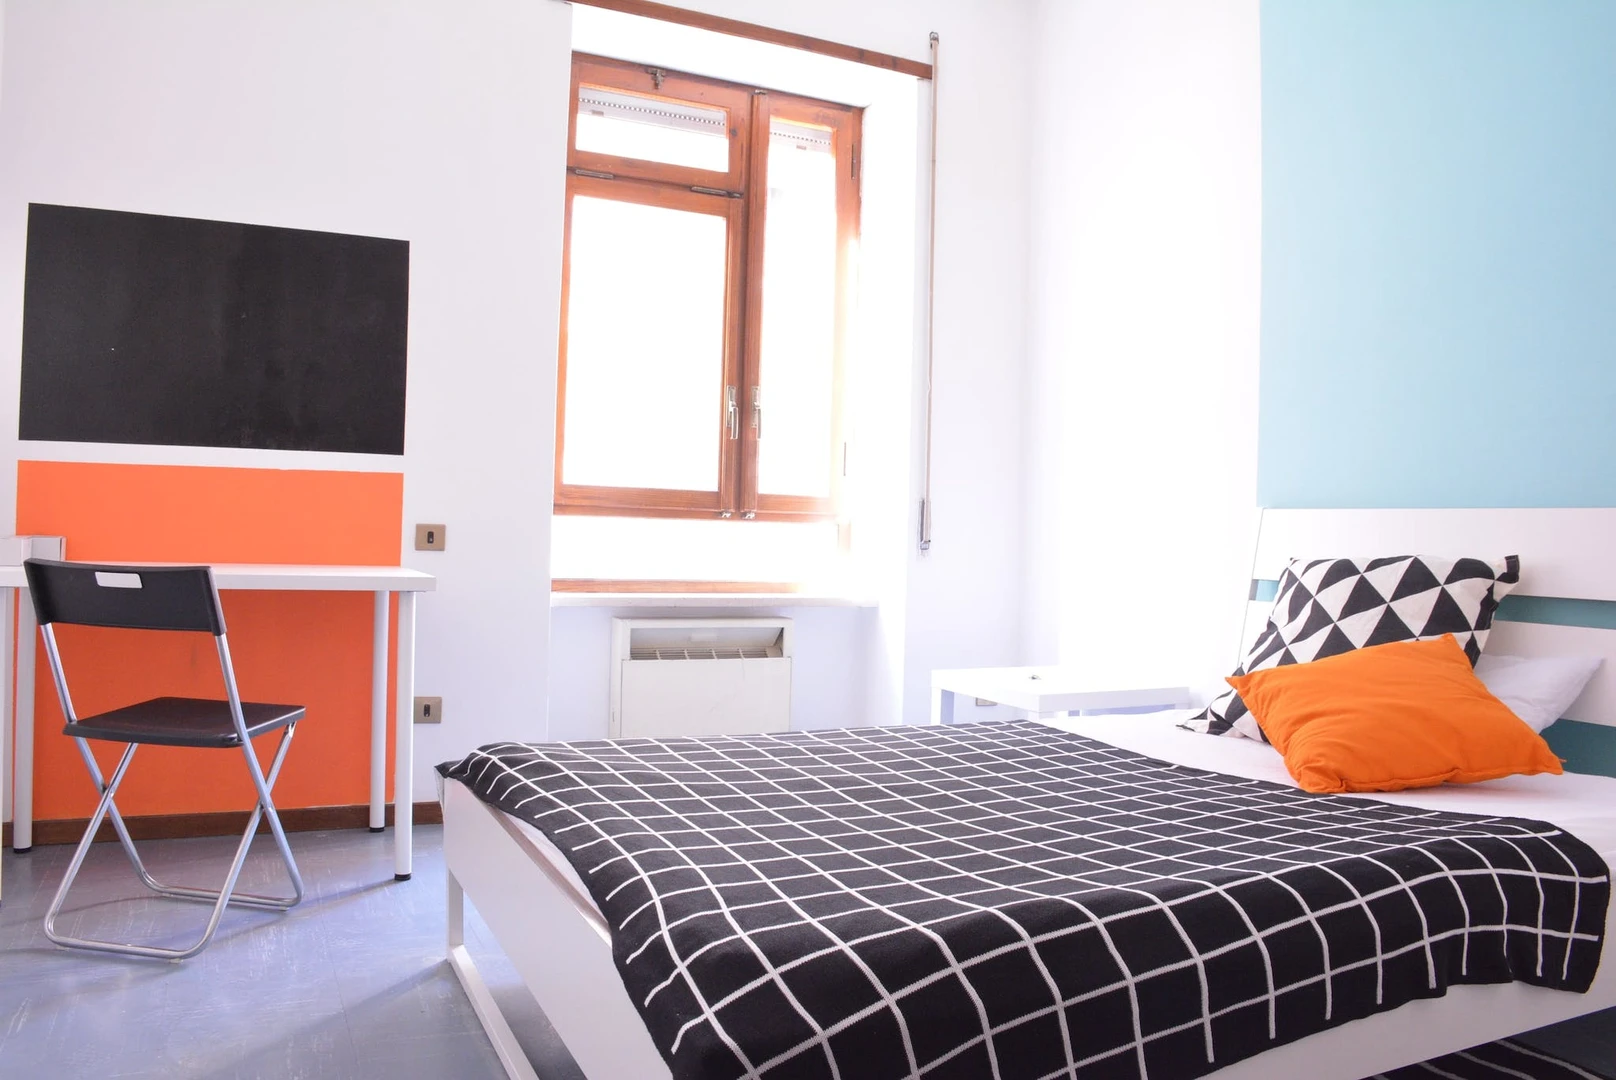 Room for rent with double bed Casteddu/cagliari